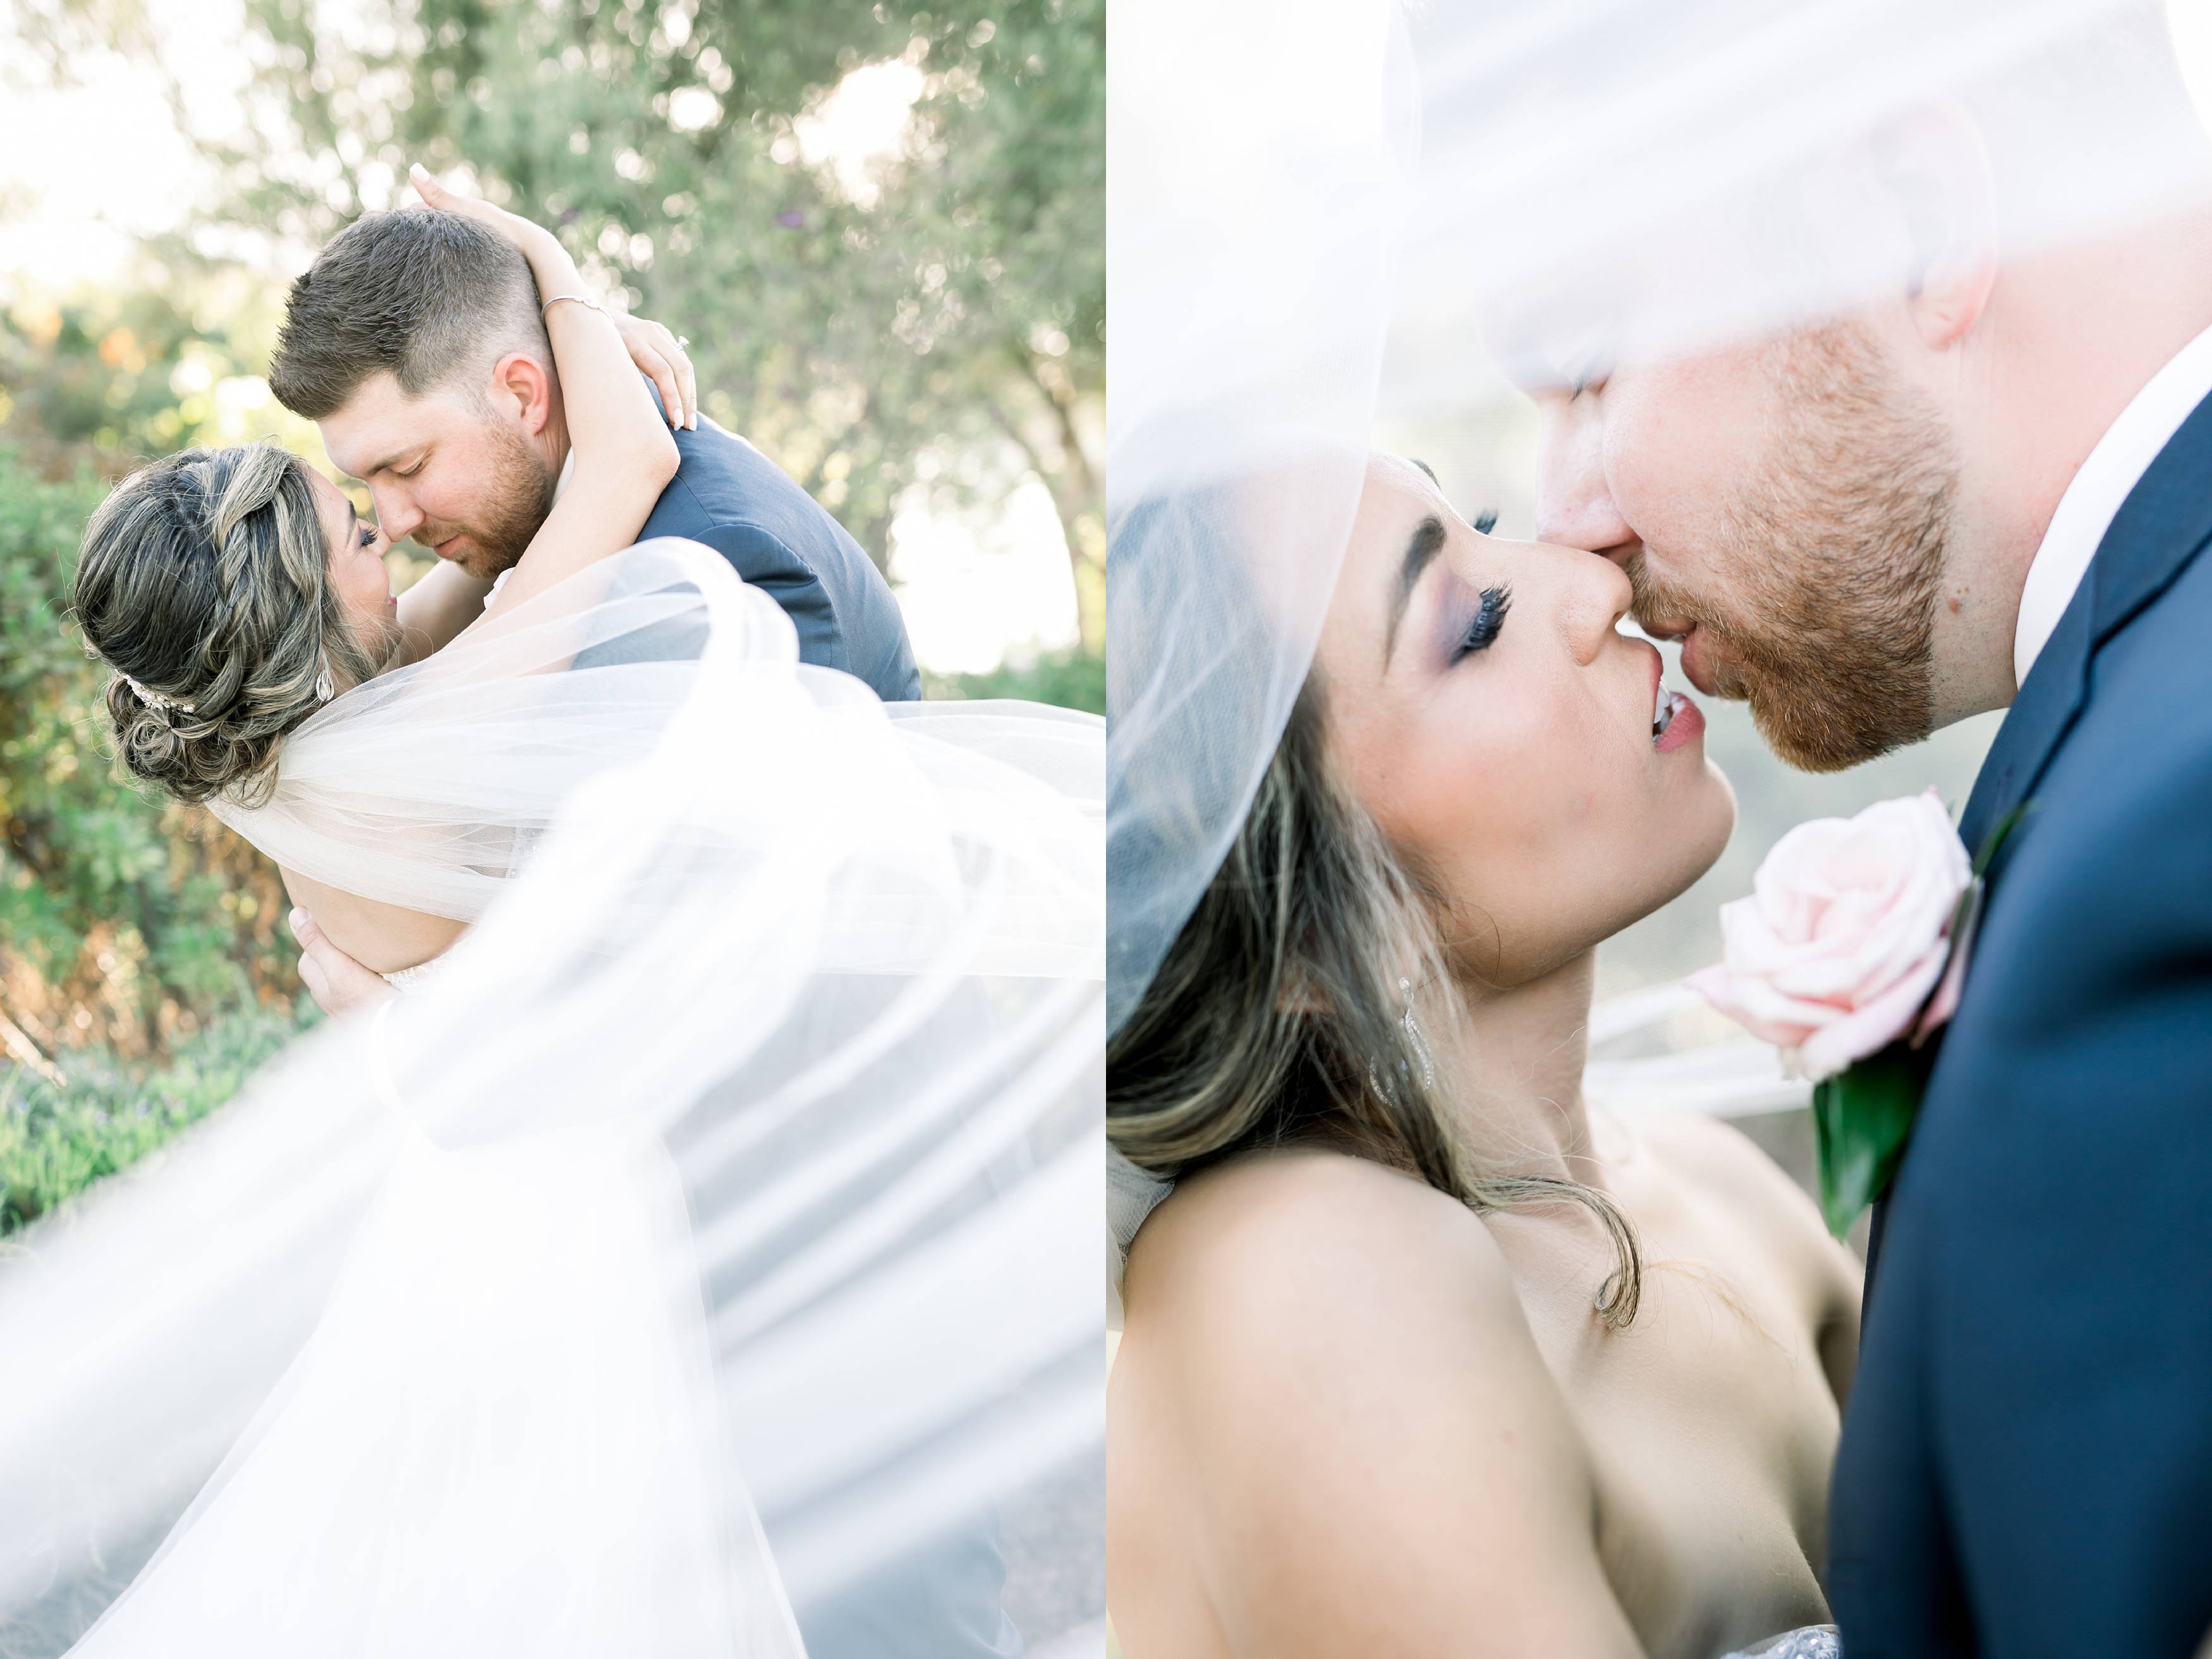 Intimate wedding photos with veil by carrie mcguire photography